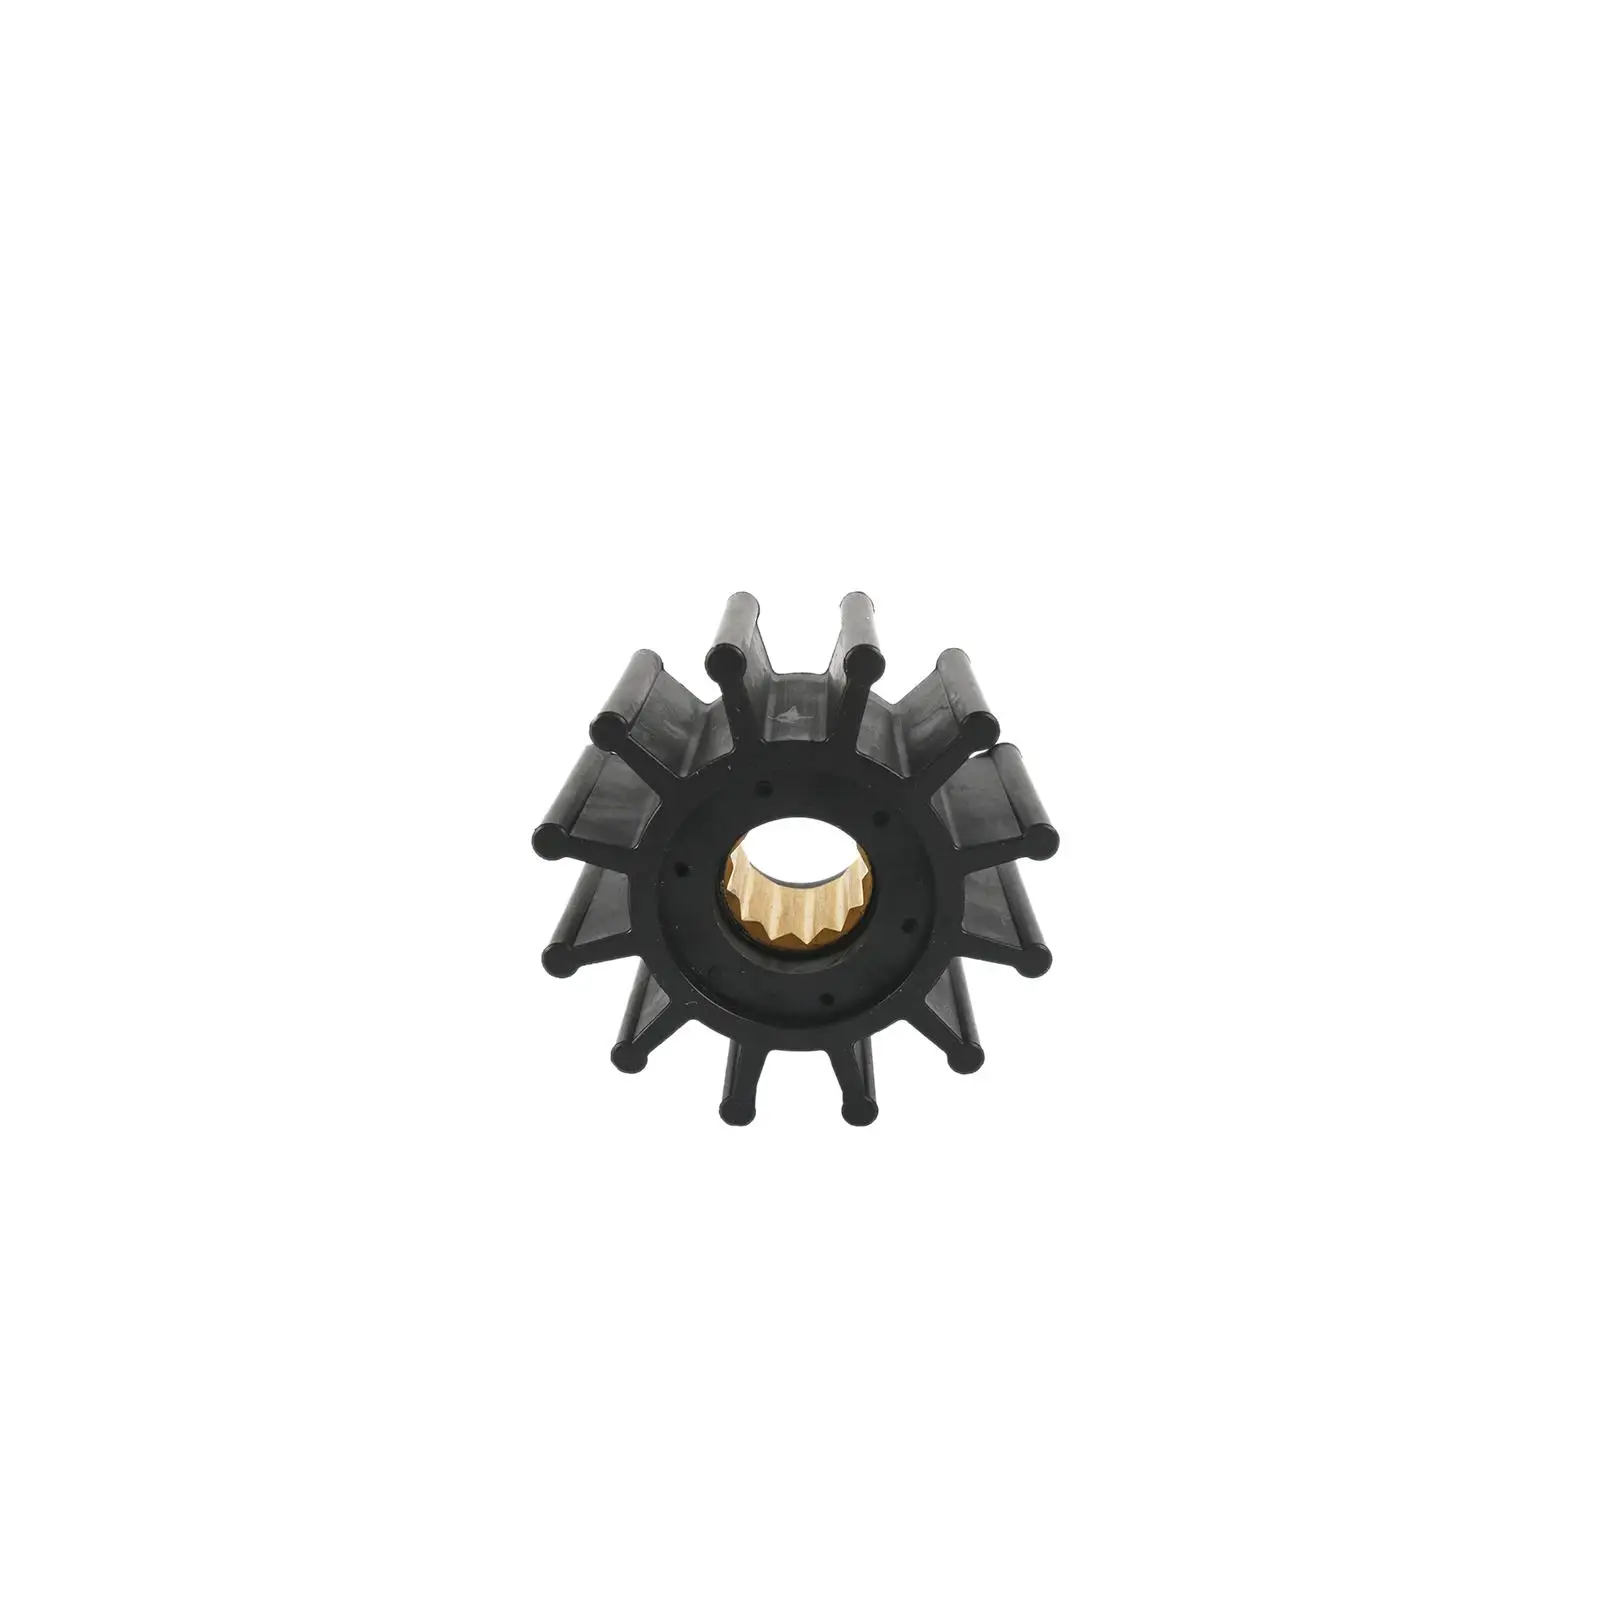 Water Pump Impeller for Volvo Penta 2195134 Boat Engine Water Pump Impeller Engine Parts Spare Parts Accessories Easy to Install